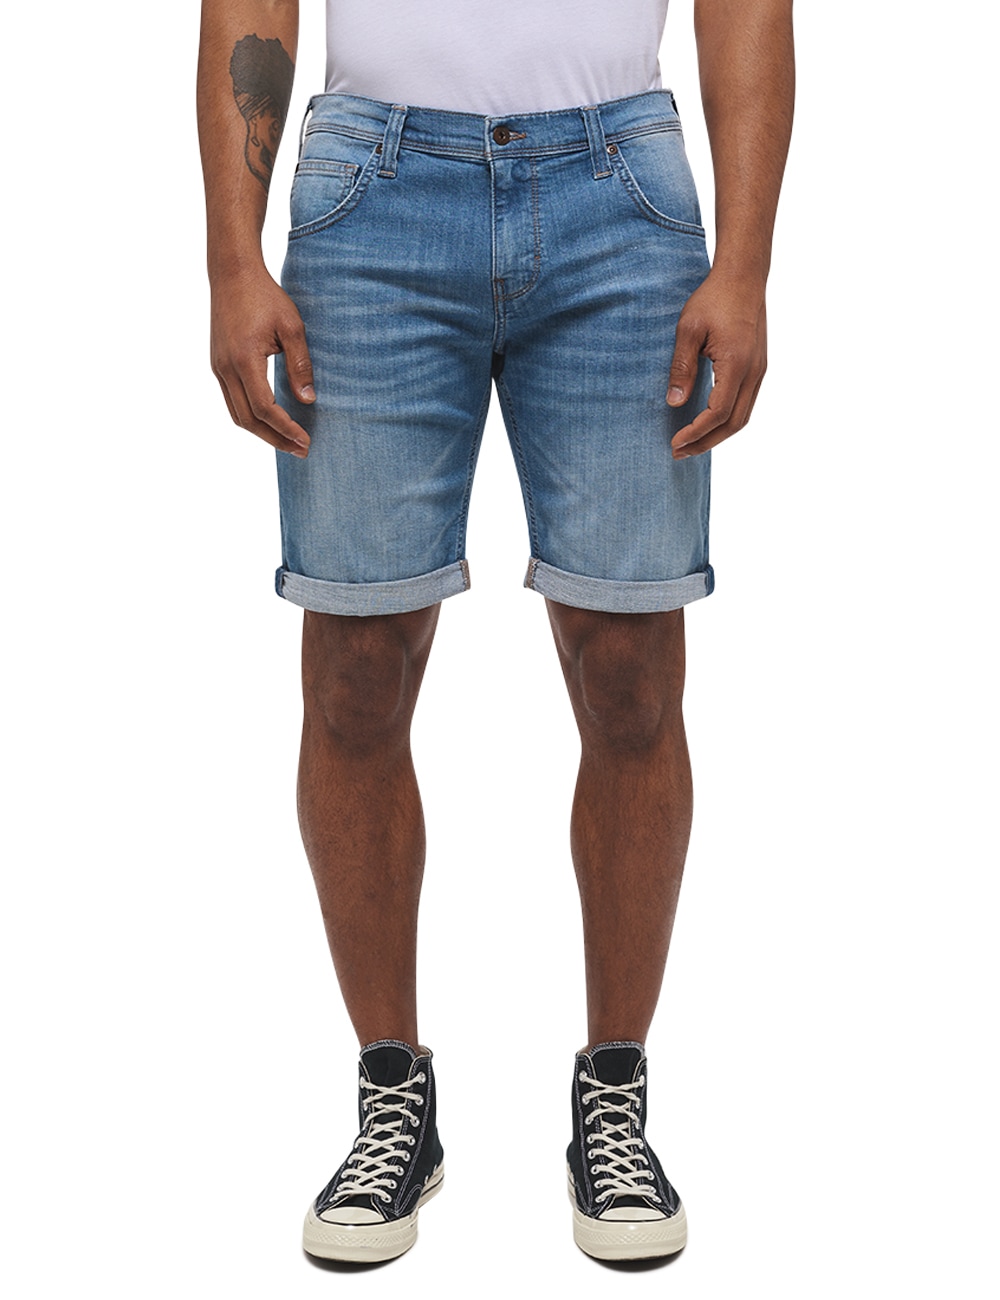 MUSTANG Jeansshorts »Chicago Shorts Z« von mustang